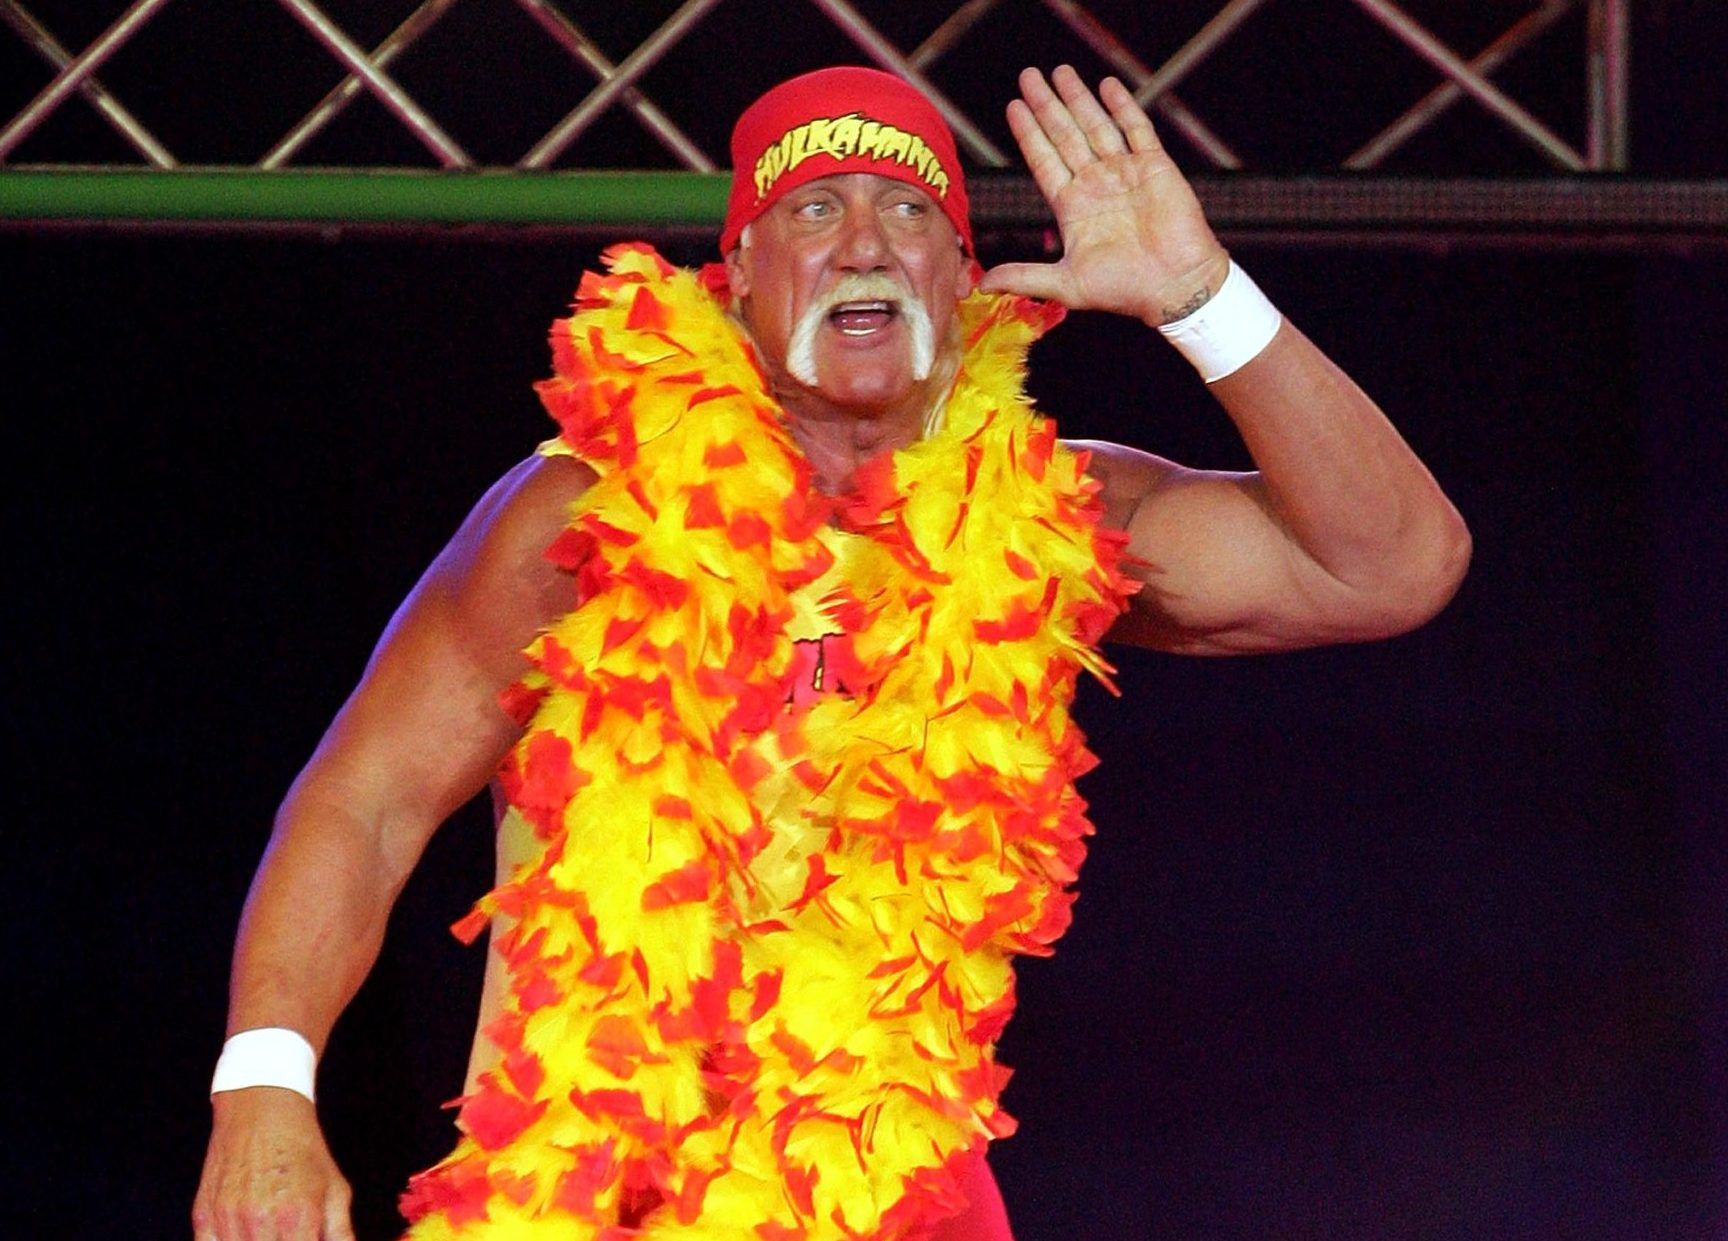 Wwe Hulk Hogan Health Update Provided Which Sounds Very Concerning